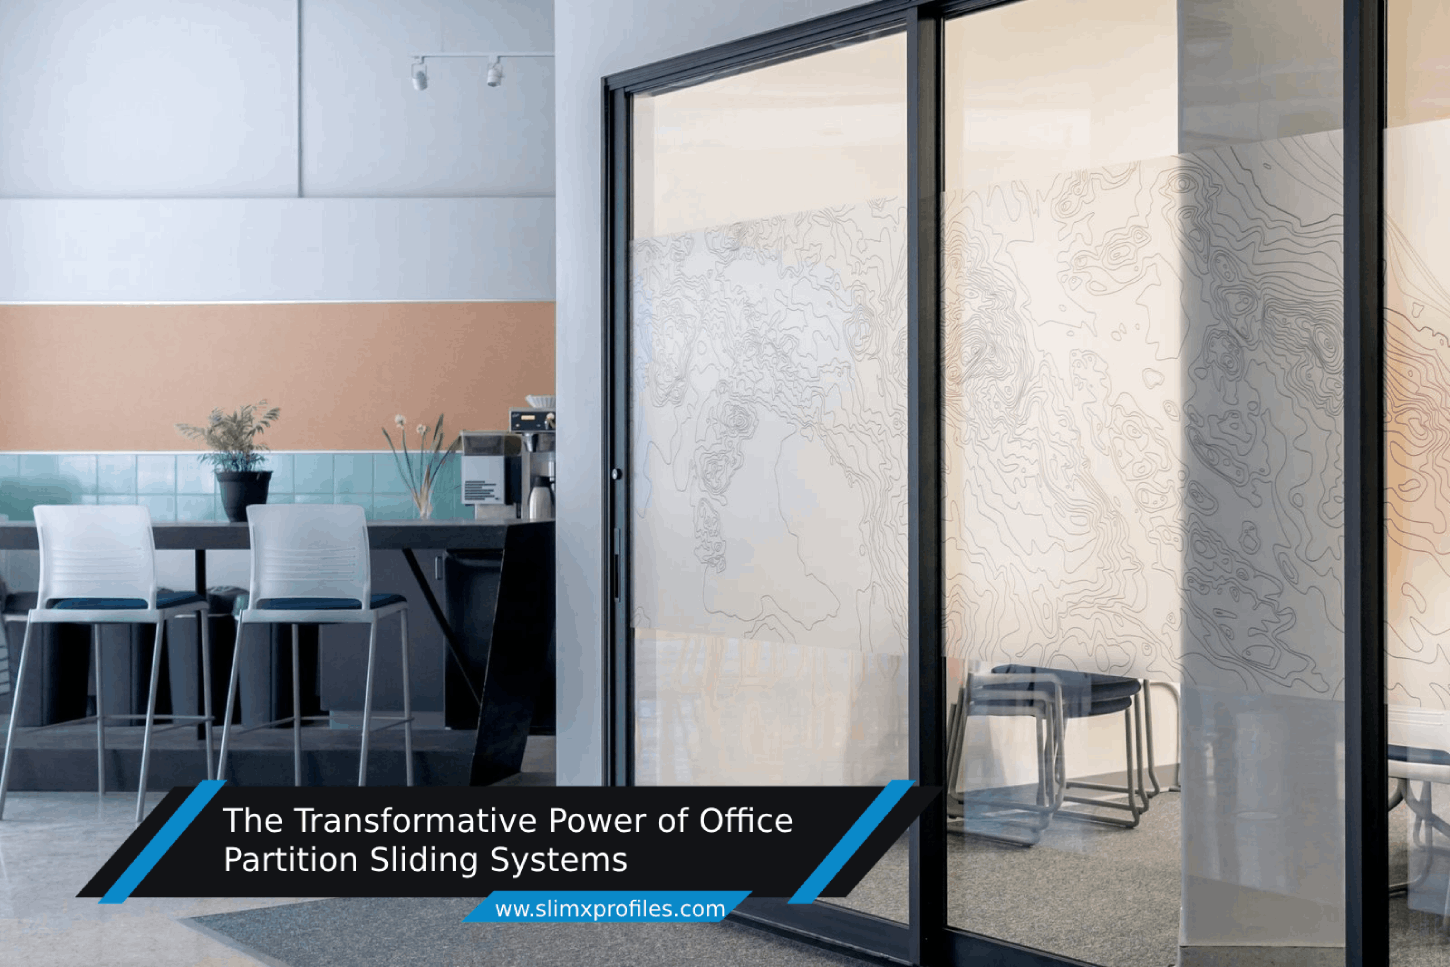  The Transformative Power of Office Partition Sliding Systems